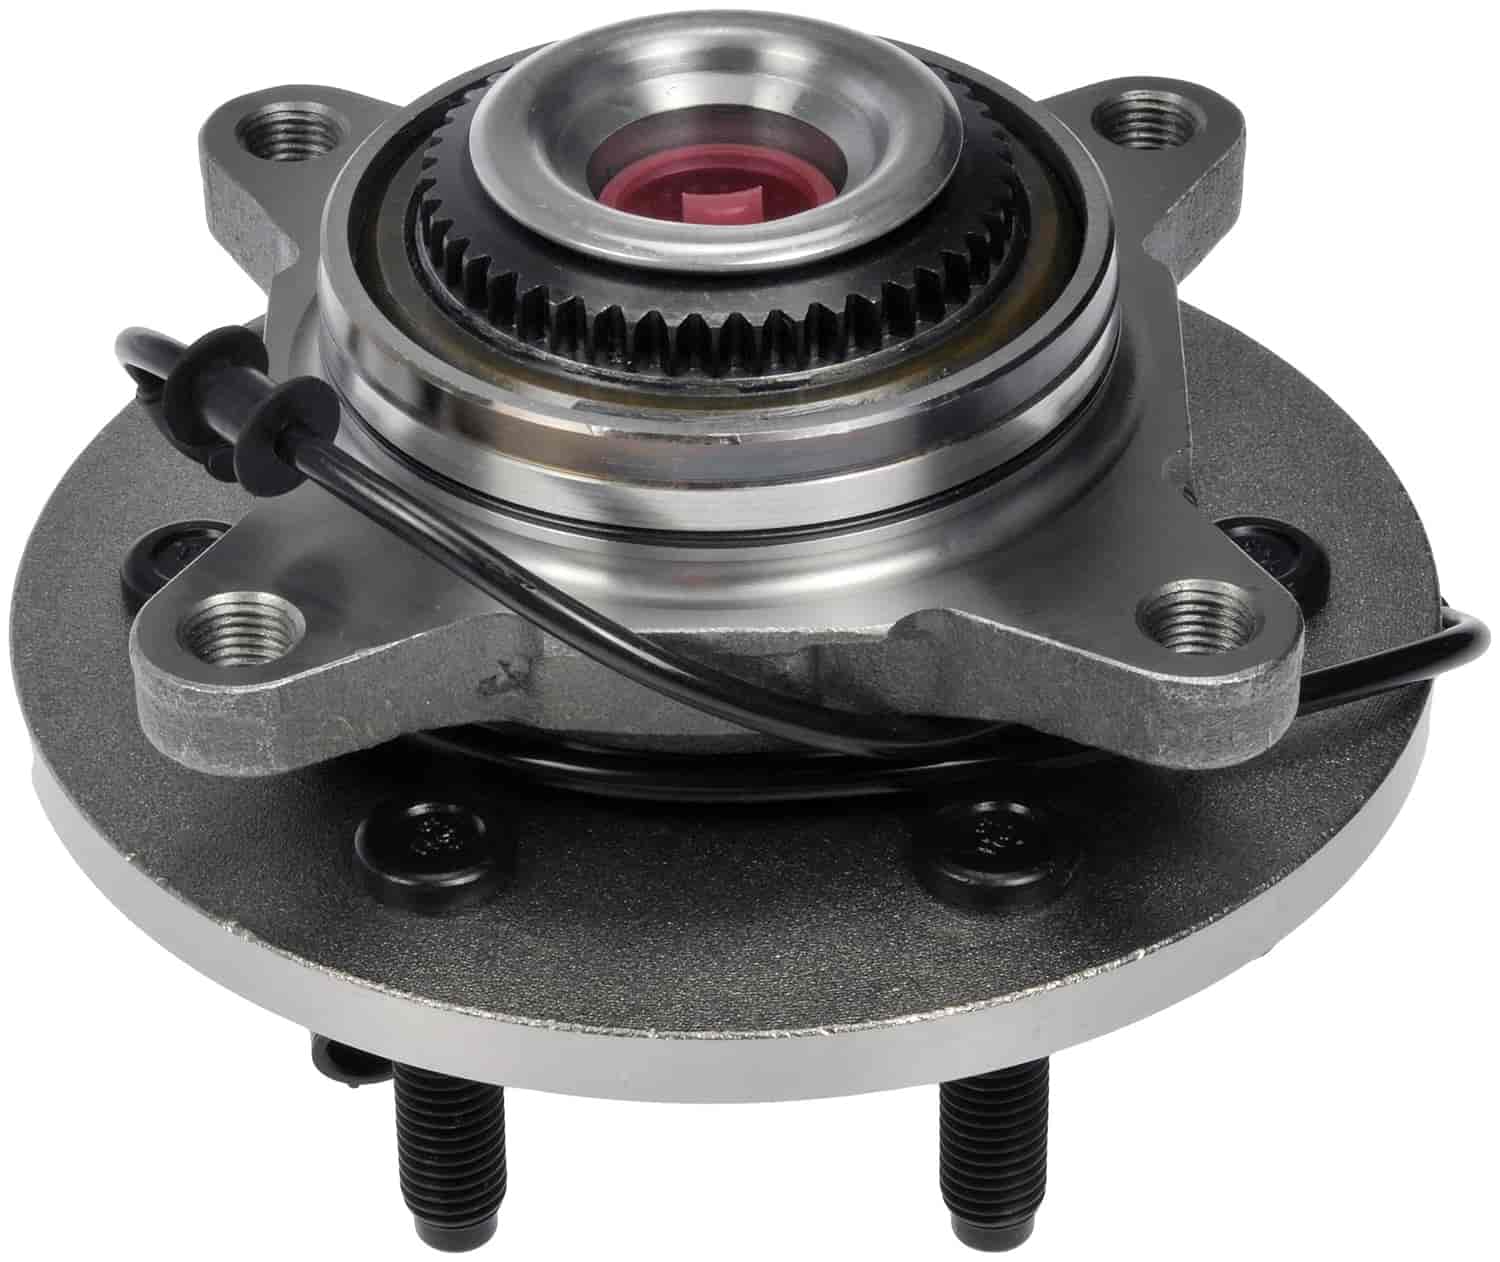 Wheel Hub and Bearing Assembly for 2005-2008 Ford F-150 Truck 4WD, 2006-2007 Lincoln Mark LT Truck 4WD [Front]